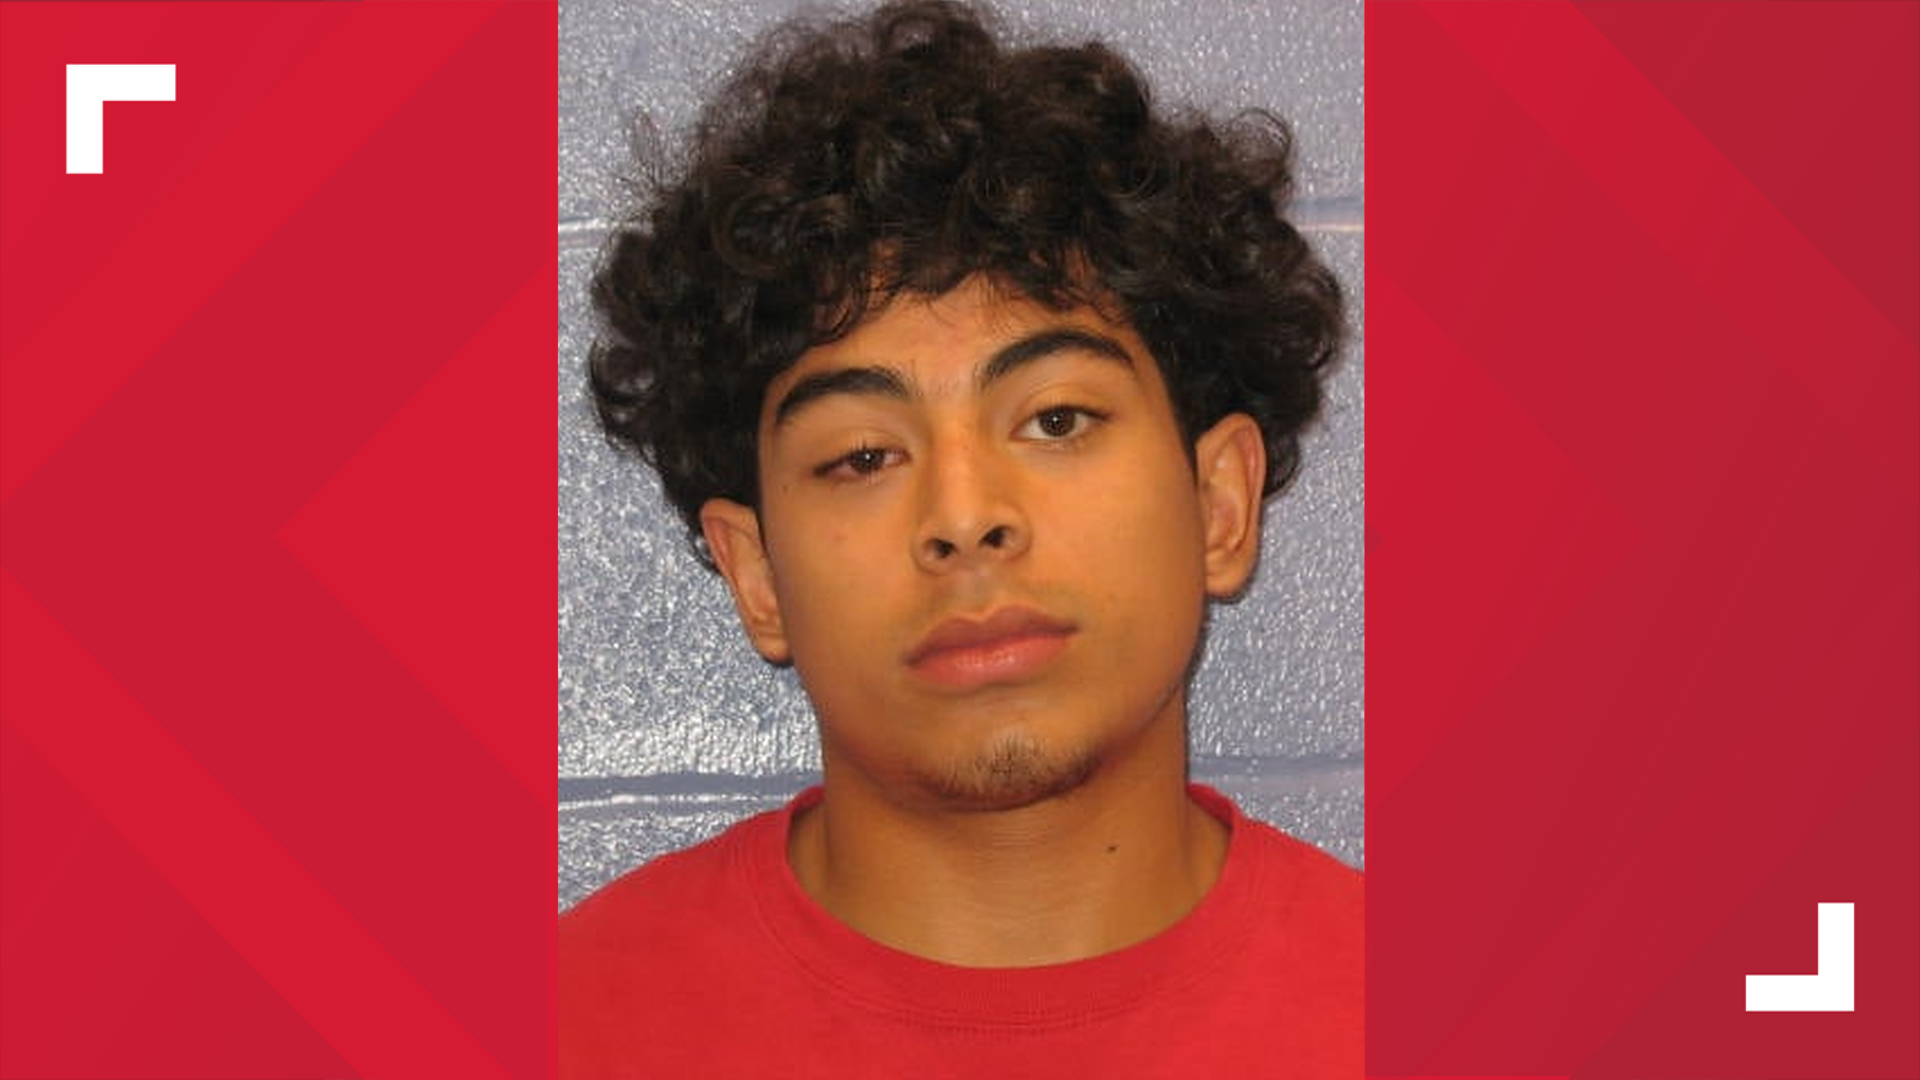 Midland County issued a warrant for 17-year-old Greg Anthony Barrera after the shooting death of 19-year-old Samuel Anaya.